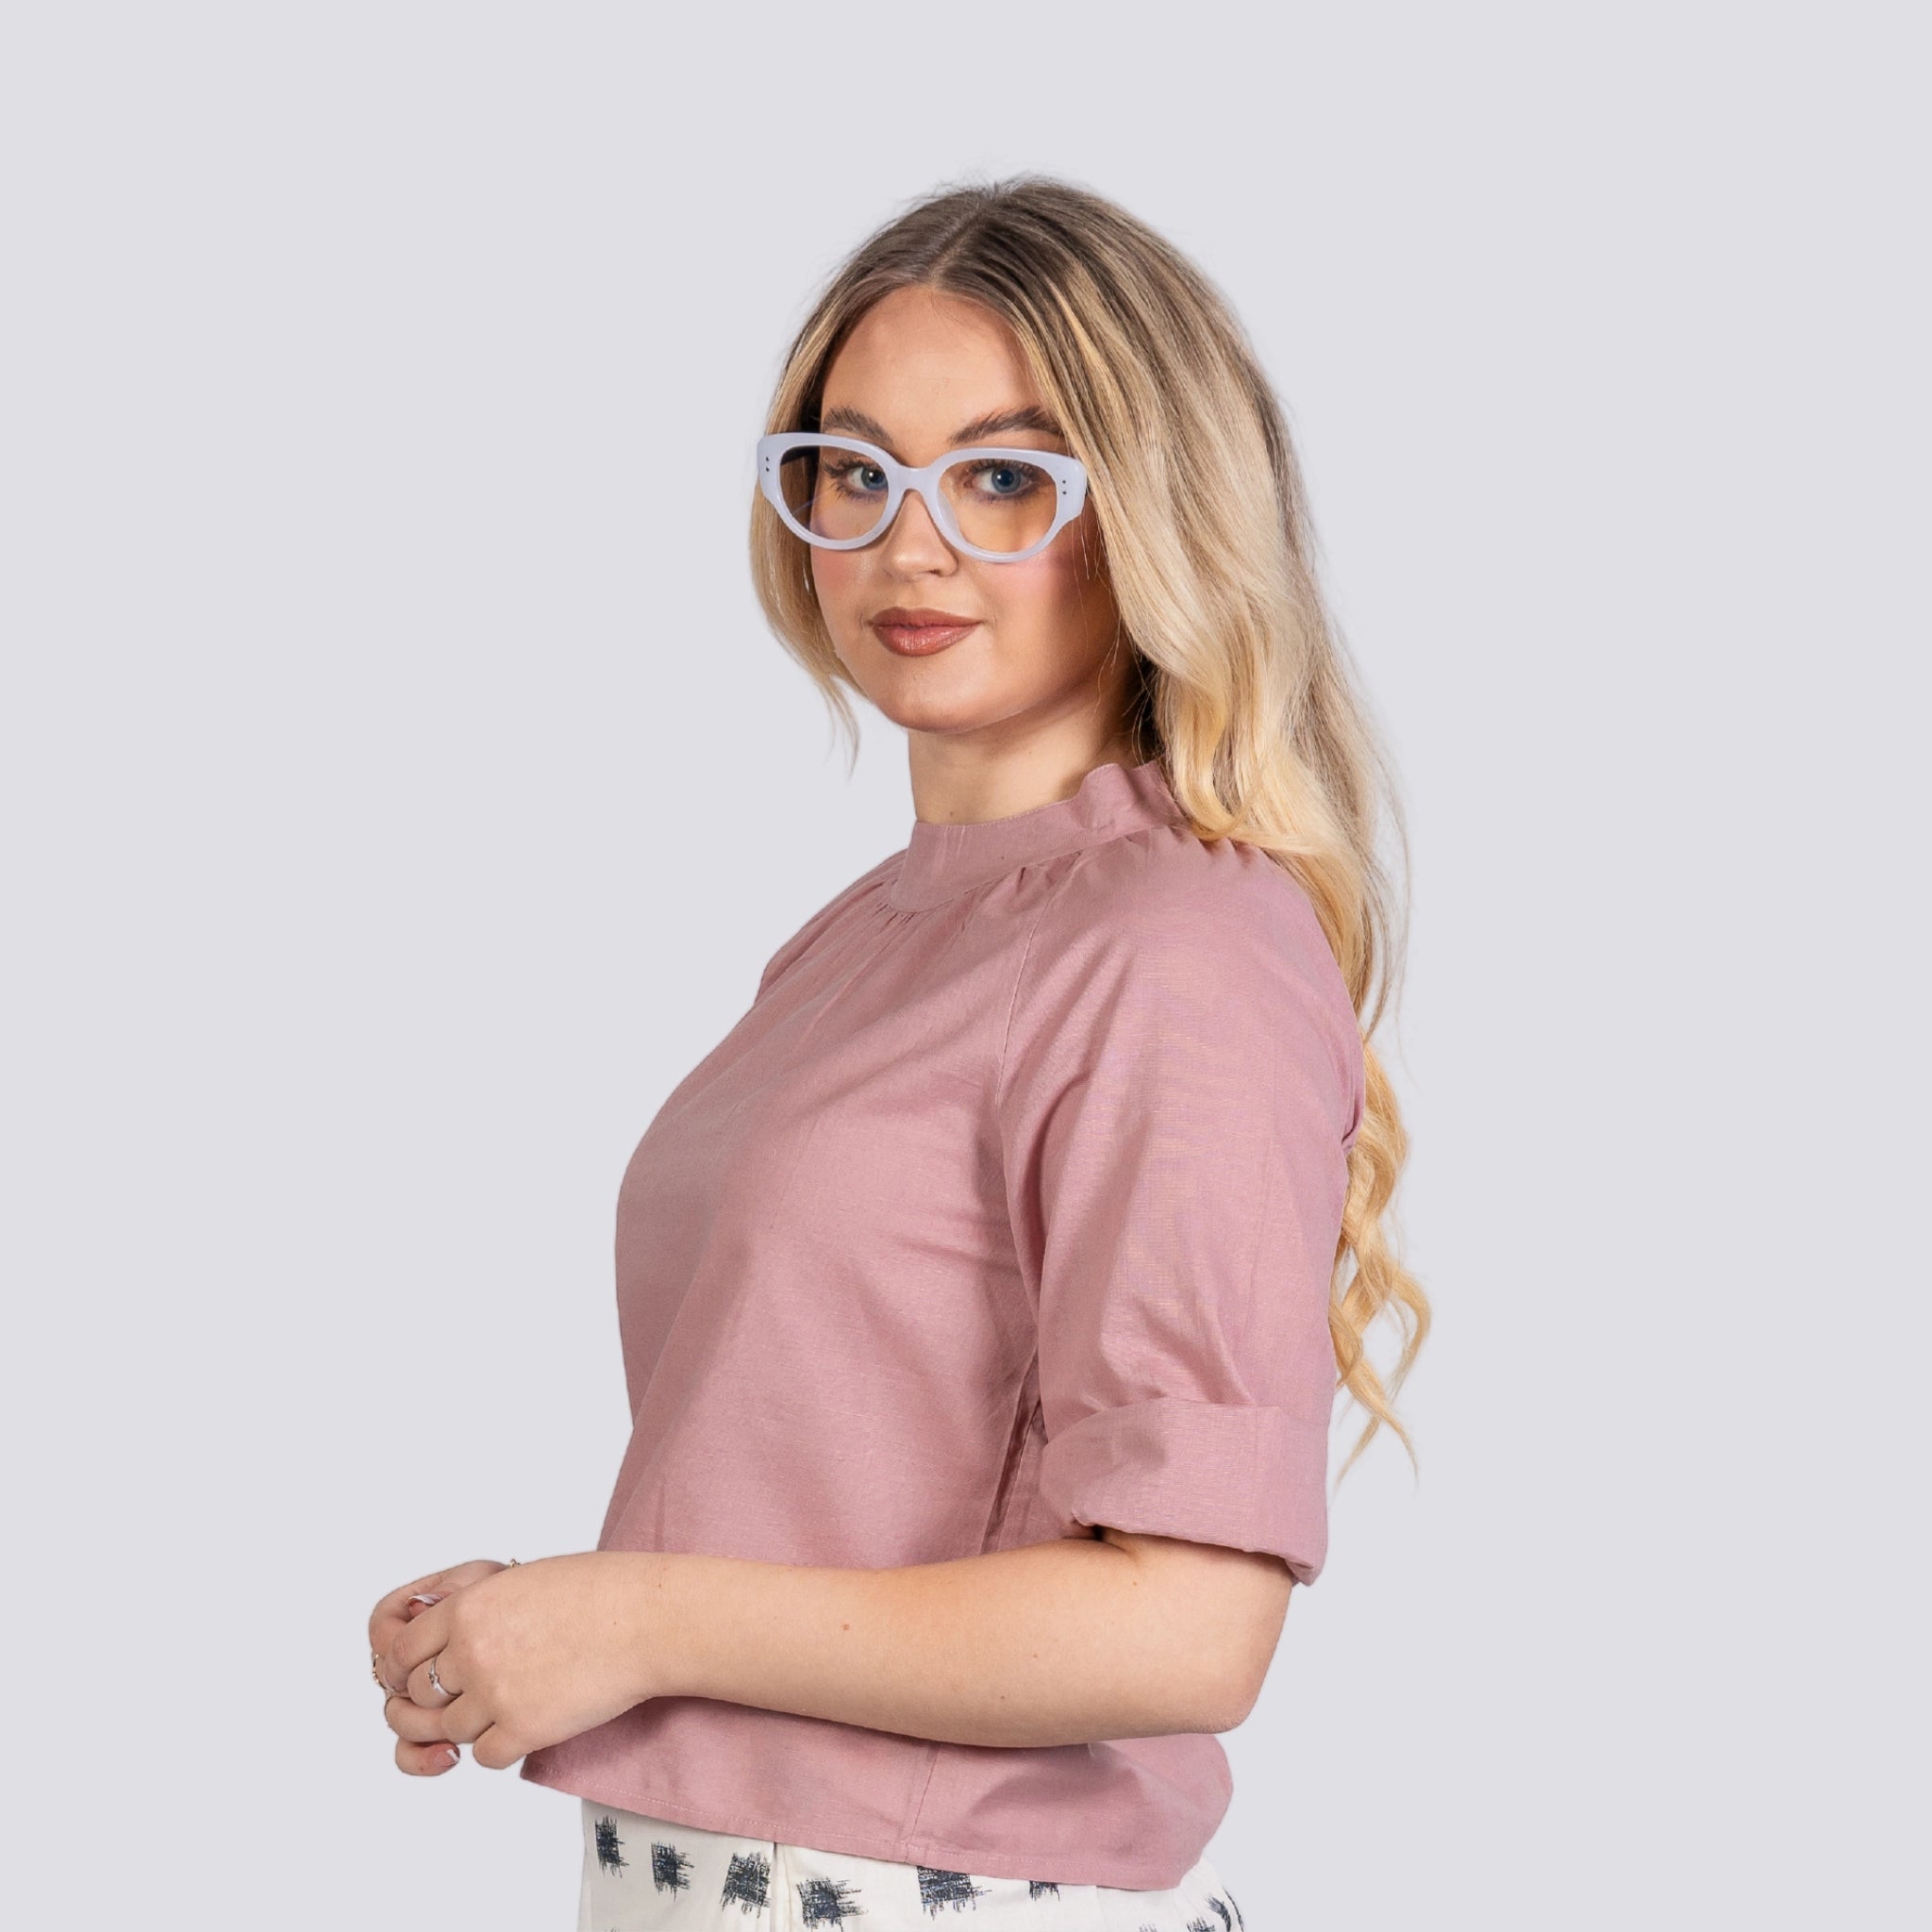 Young woman wearing glasses and a Karee Flamingo Rose 3/4 Sleeve Linen-Cotton Top For Women, standing confidently with her hands clasped, against a plain background.